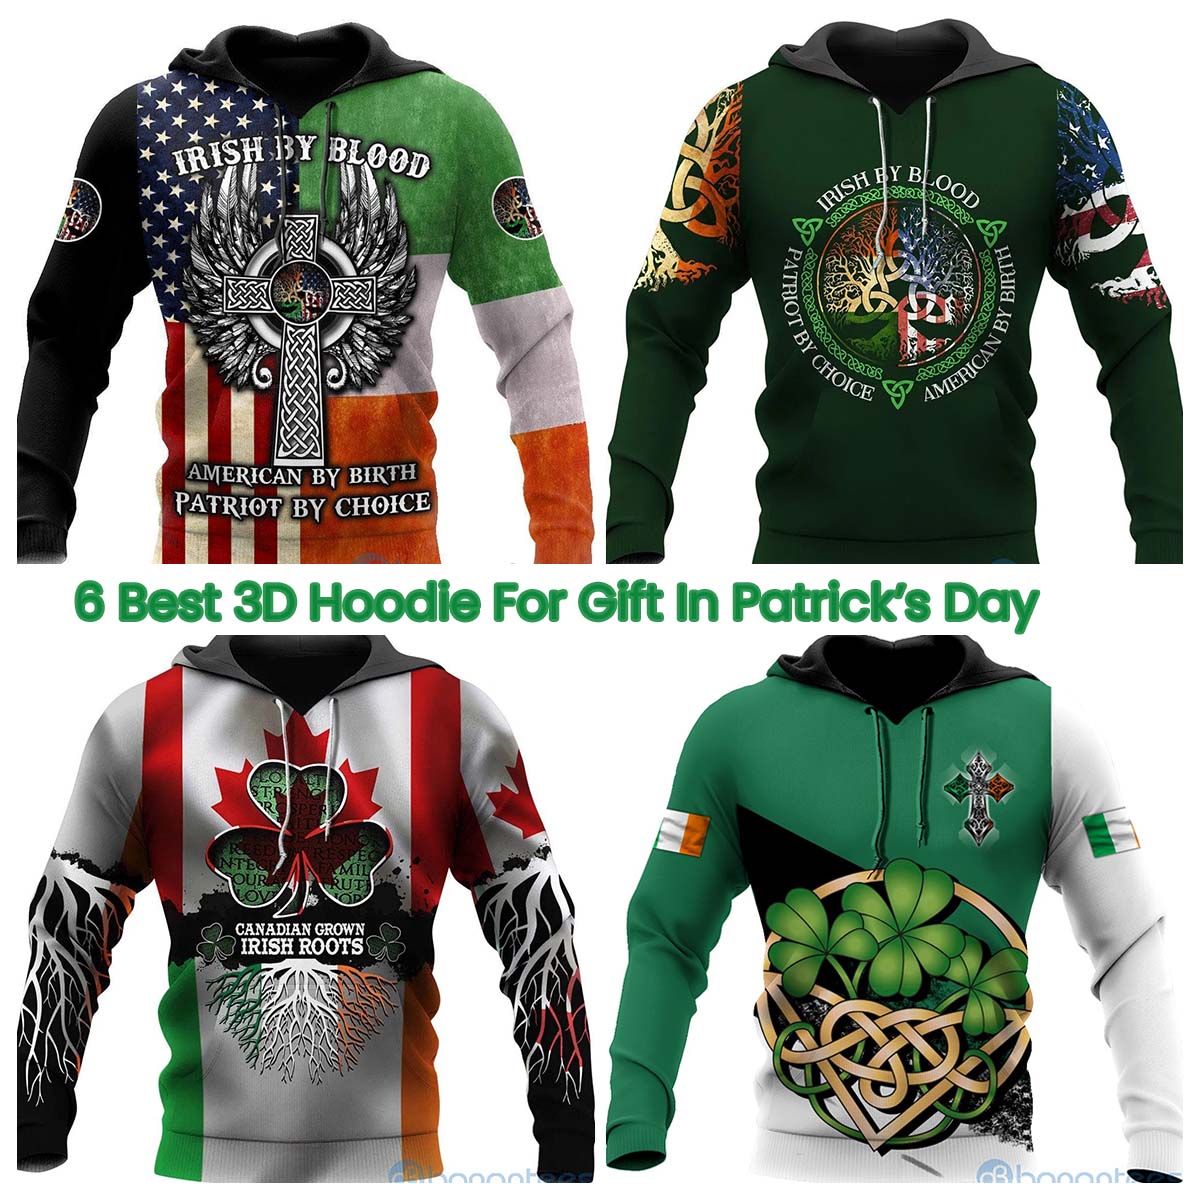 6 Best 3D Hoodie For Gift In Patrick’s Day